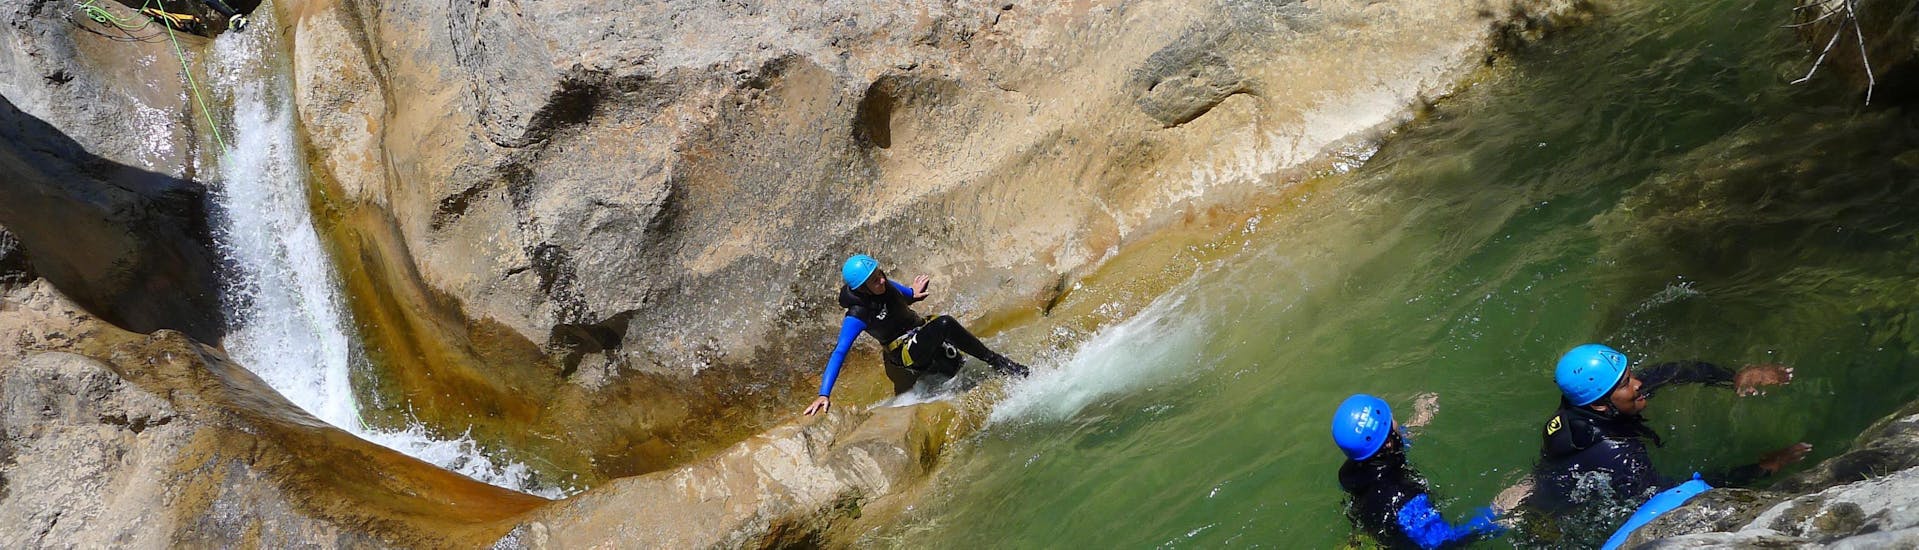 Gevorderde Canyoning in Oô - Canyon d'Oô.